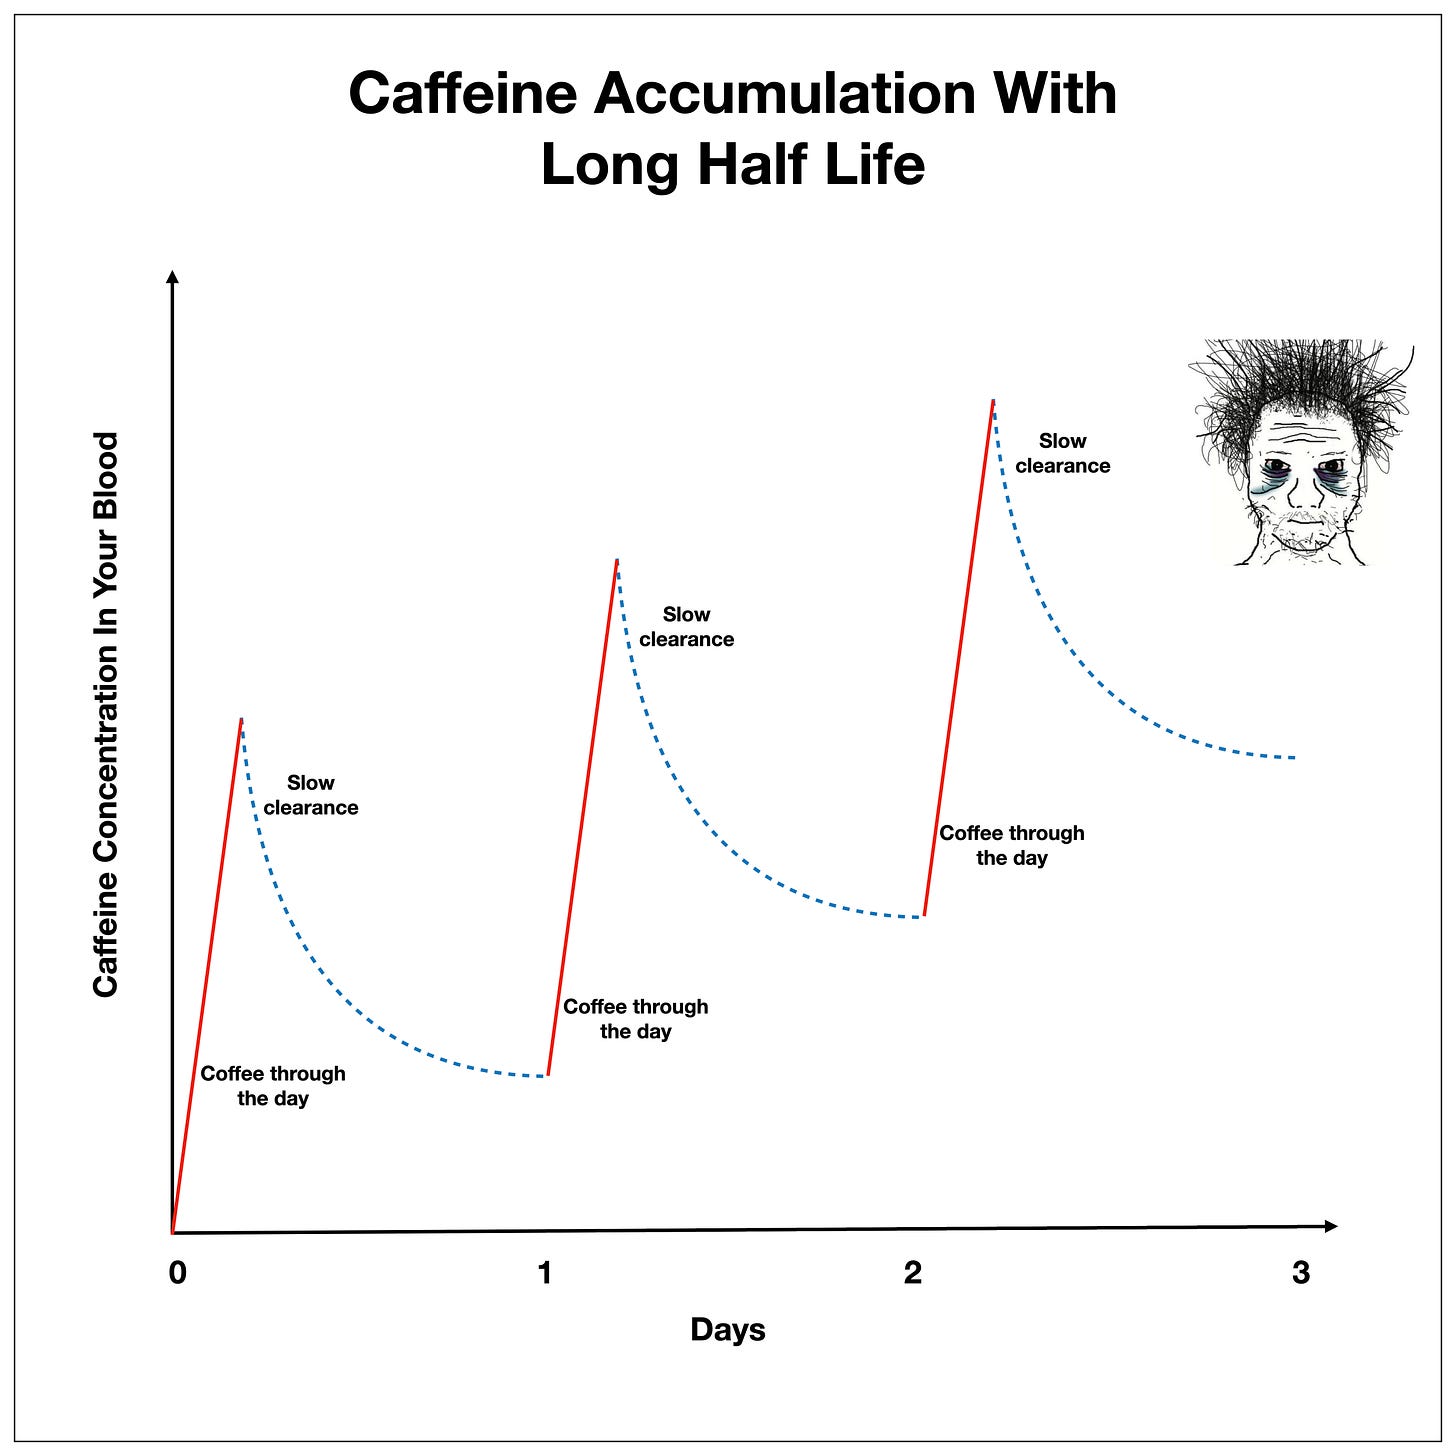 graph showing caffeine accumulation with long half life